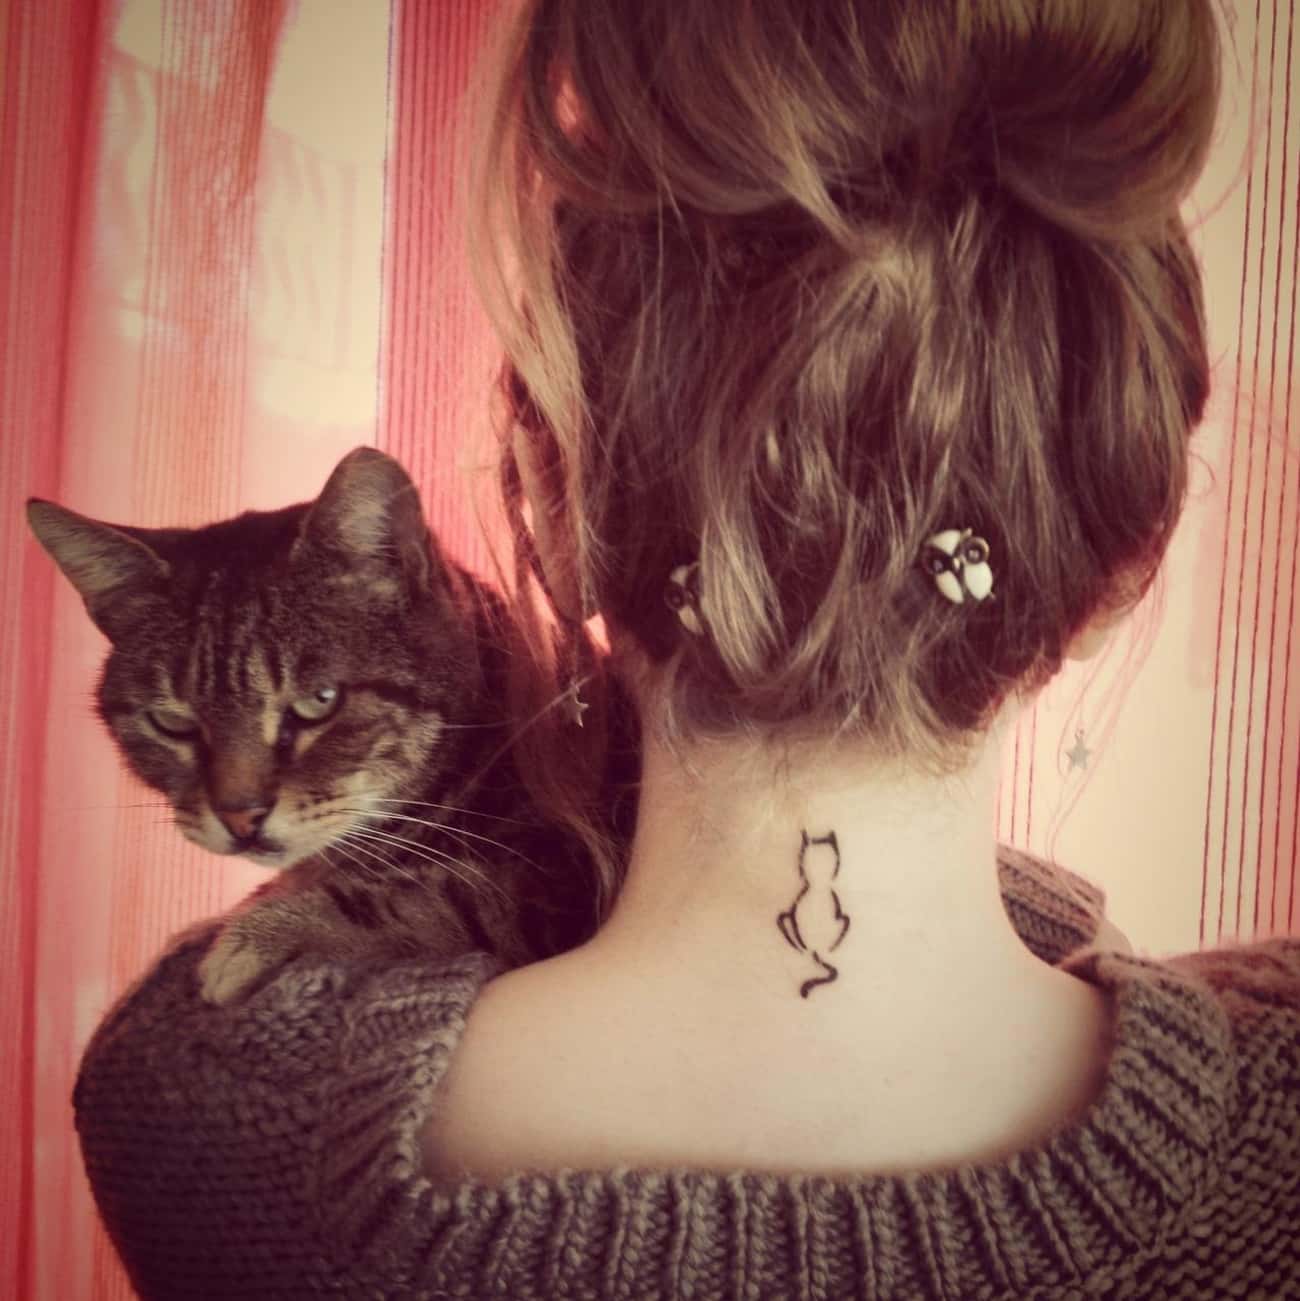 This Minimalist Tattoo for the Cat Lover